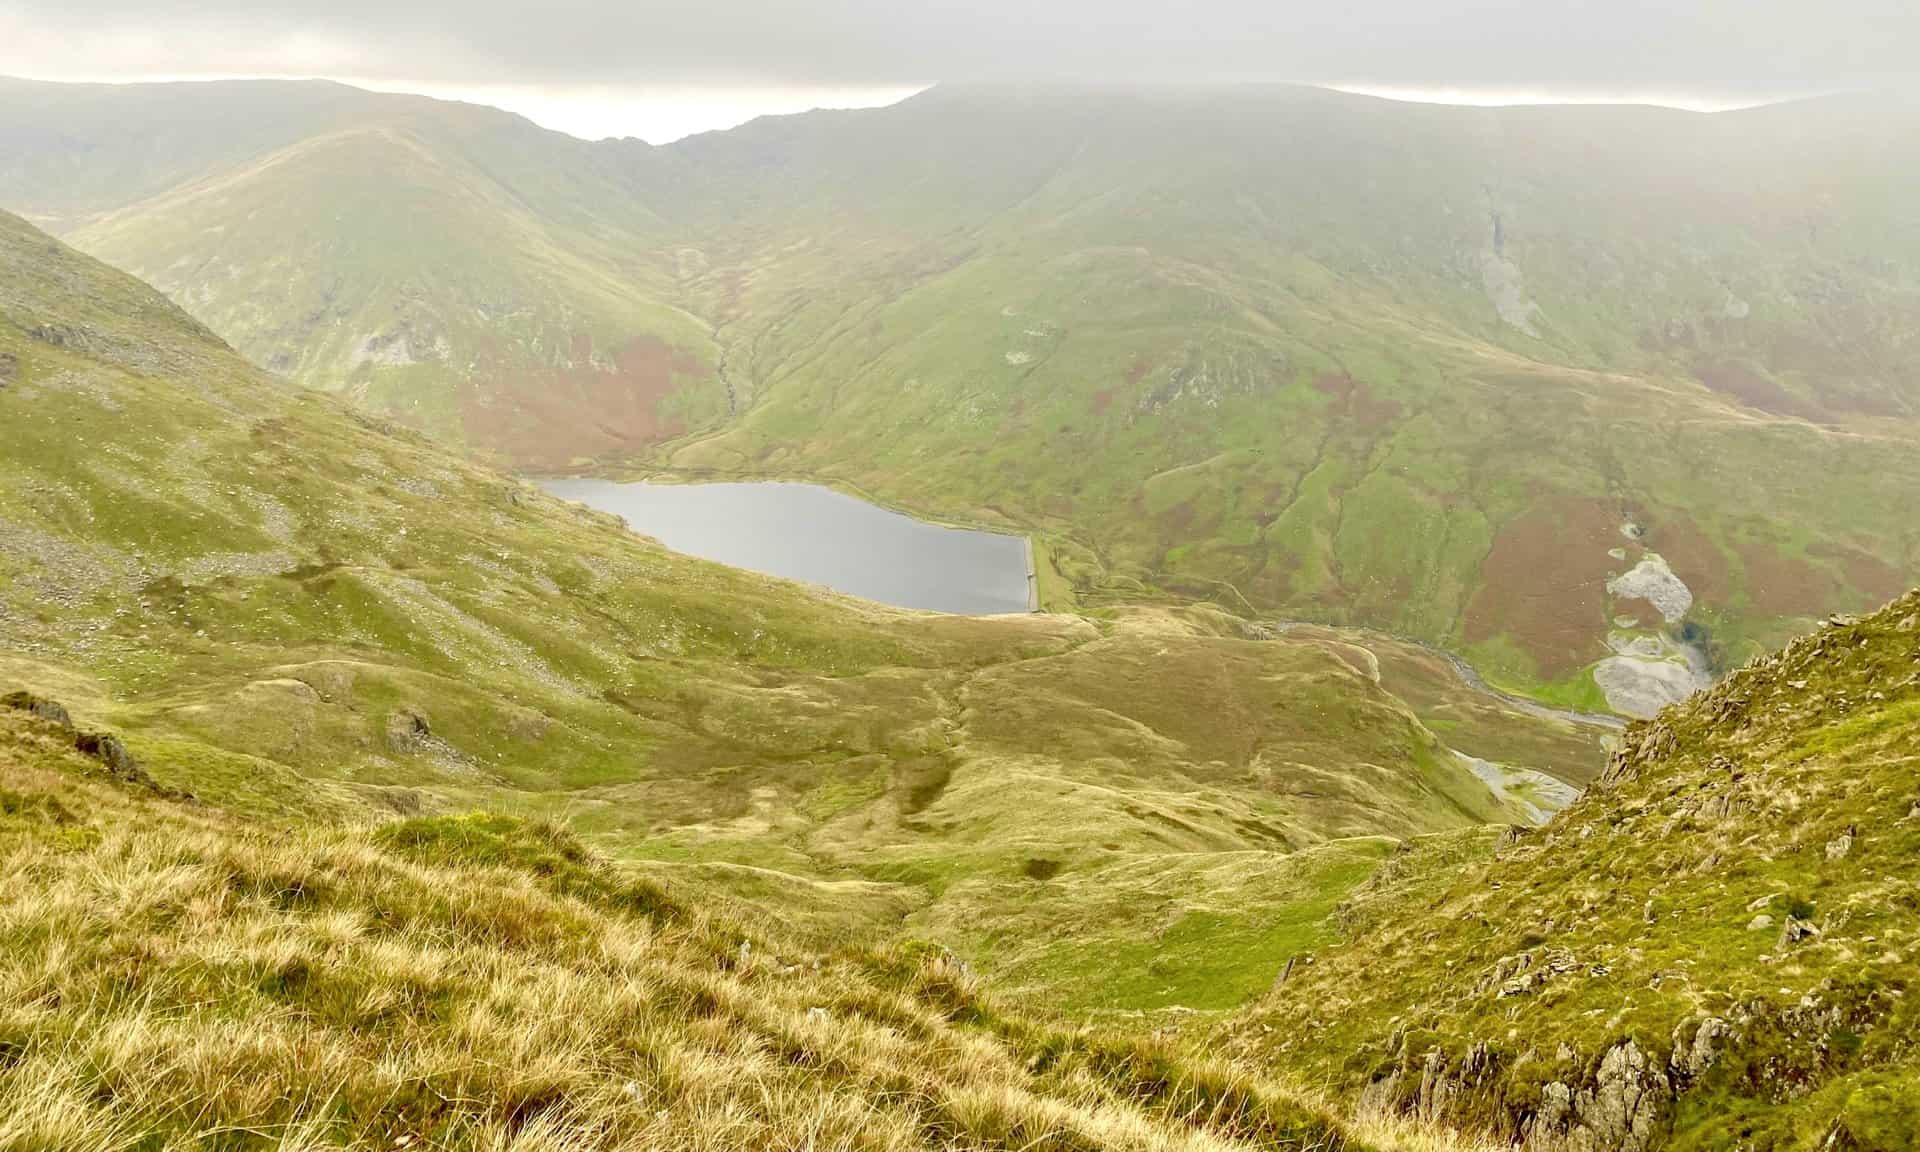 The view of Kentmere Reservoir from Yoke. Behind the reservoir Lingmell Gill flows down through the valley between Mardale Ill Bell (horizon, left) and Harter Fell (cloud-covered, right).